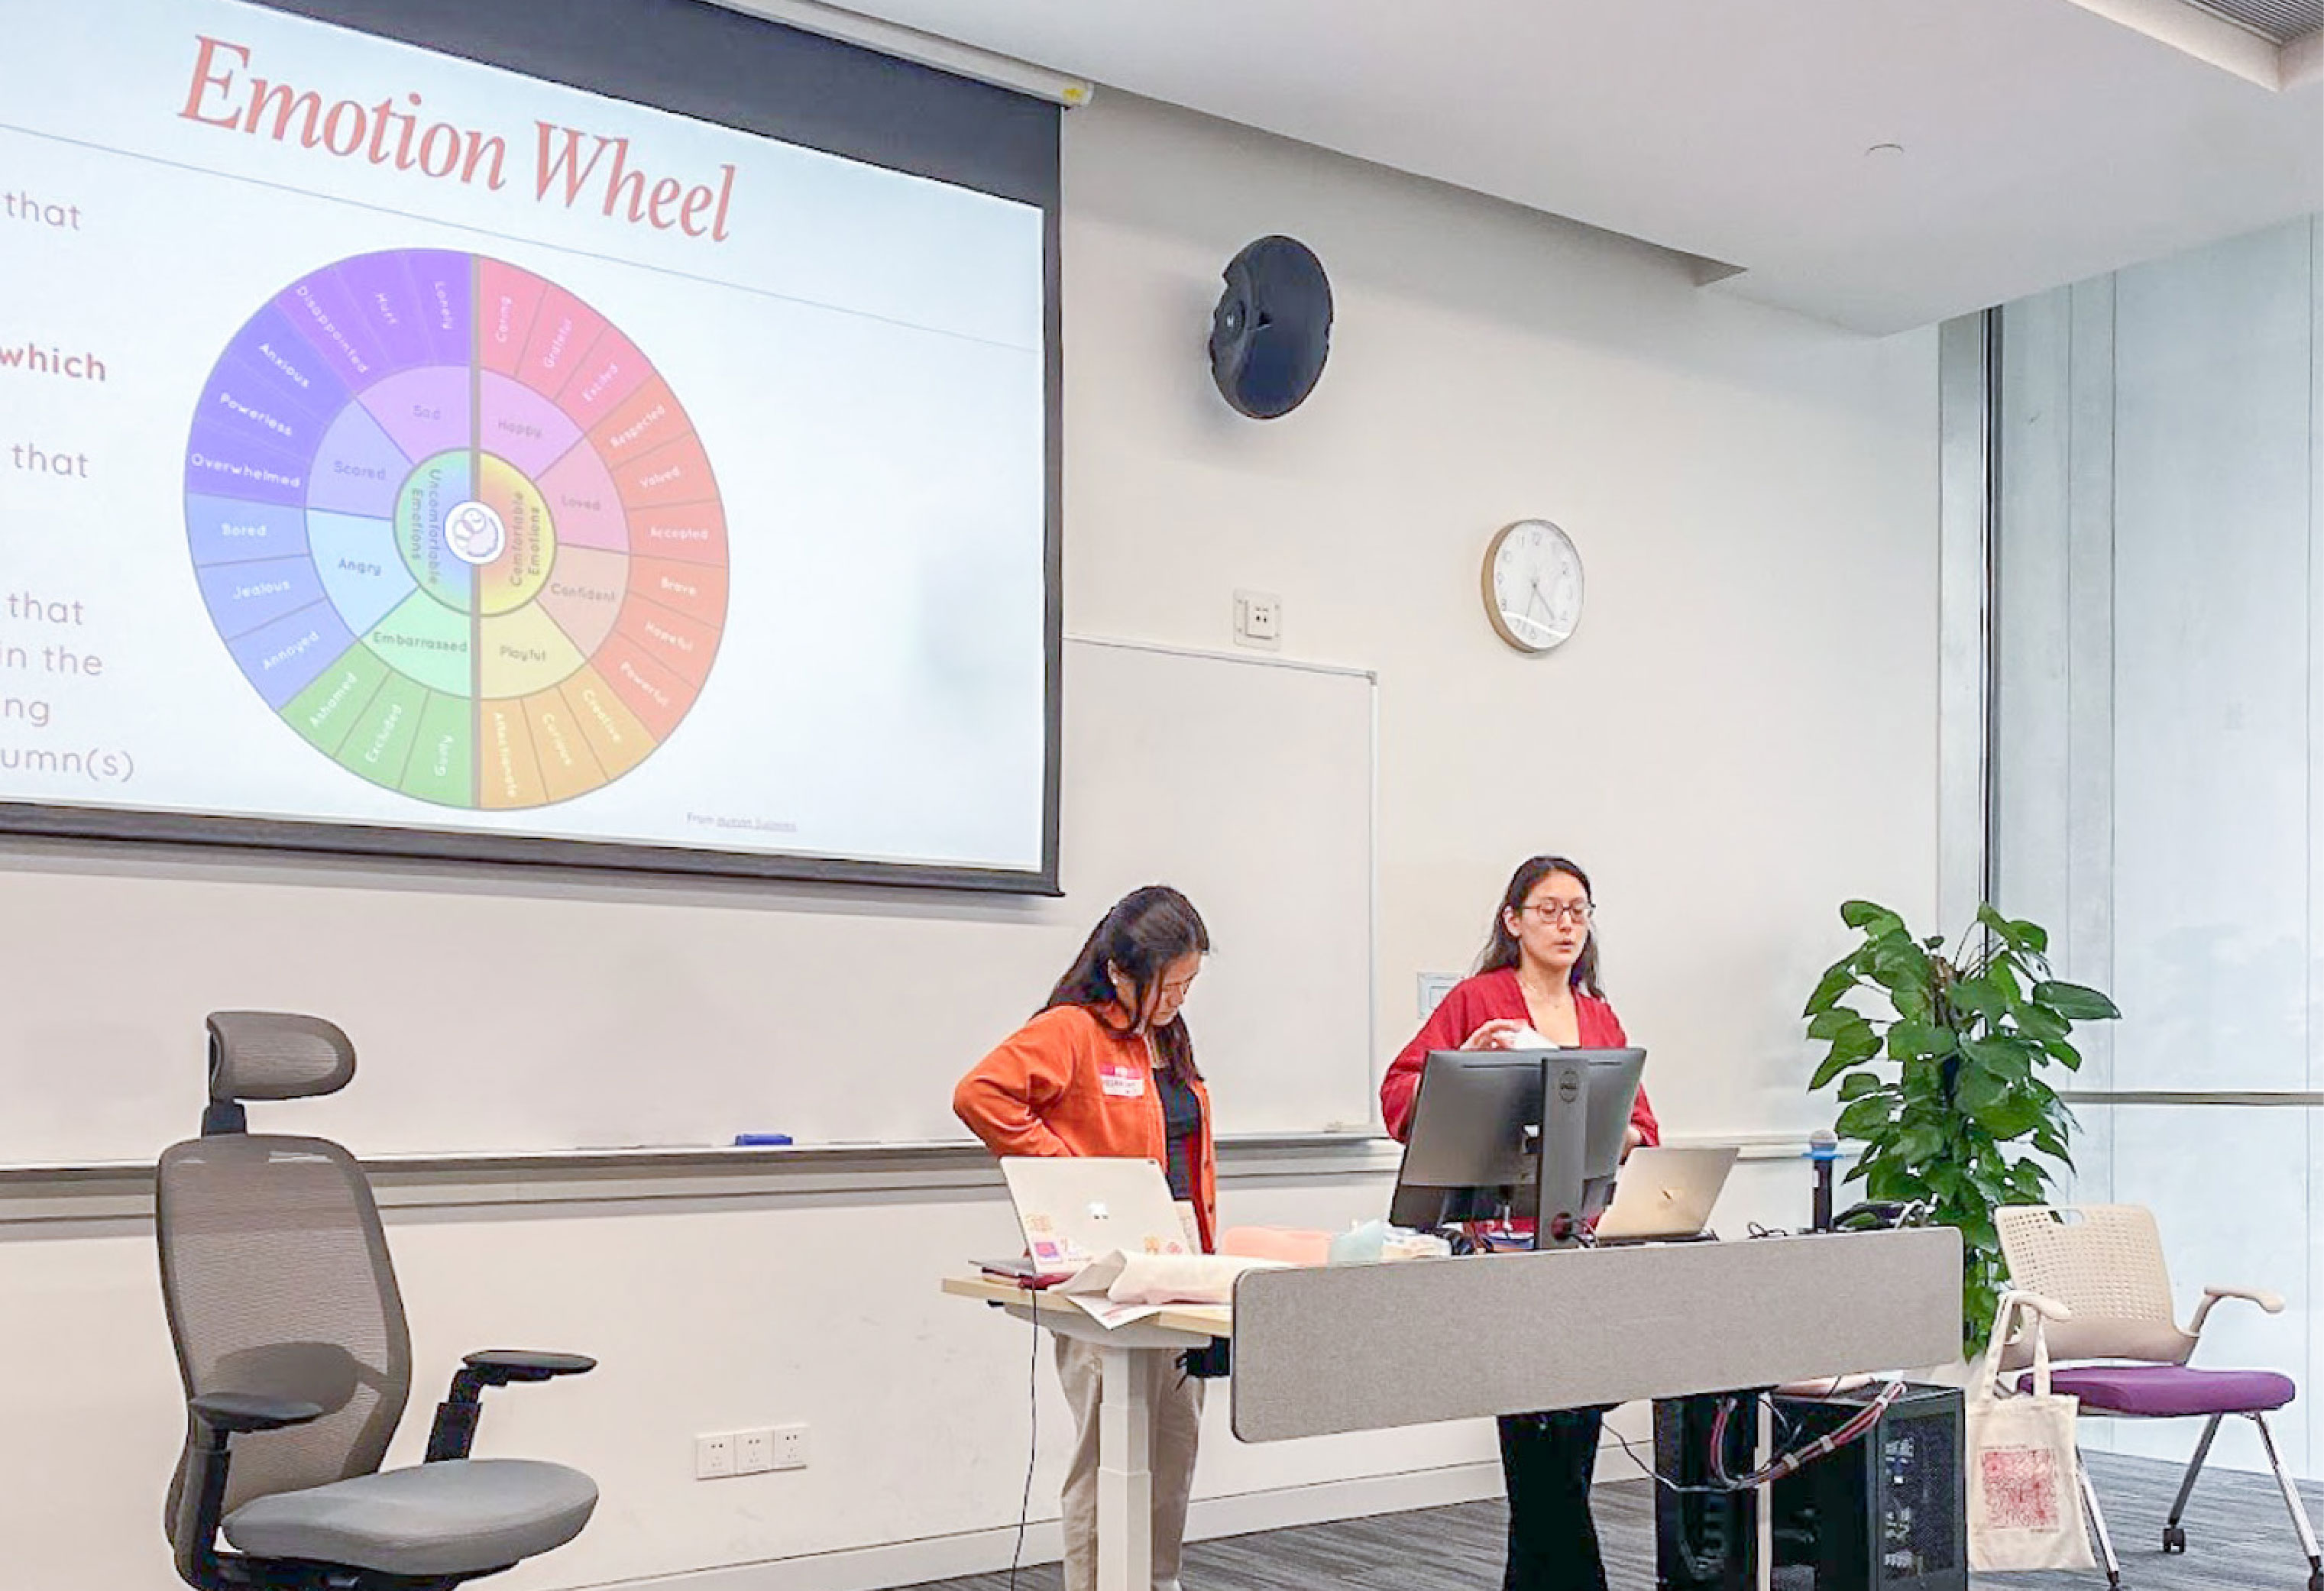 Megan Schellong (left) and Yuechi Kelly (right) presenting a session on “Adoptee Language and Power” on April 27 at the Second Annual Adoptee Symposium on the New Bund campus. photo credit: Tong Zhou Lafrance 